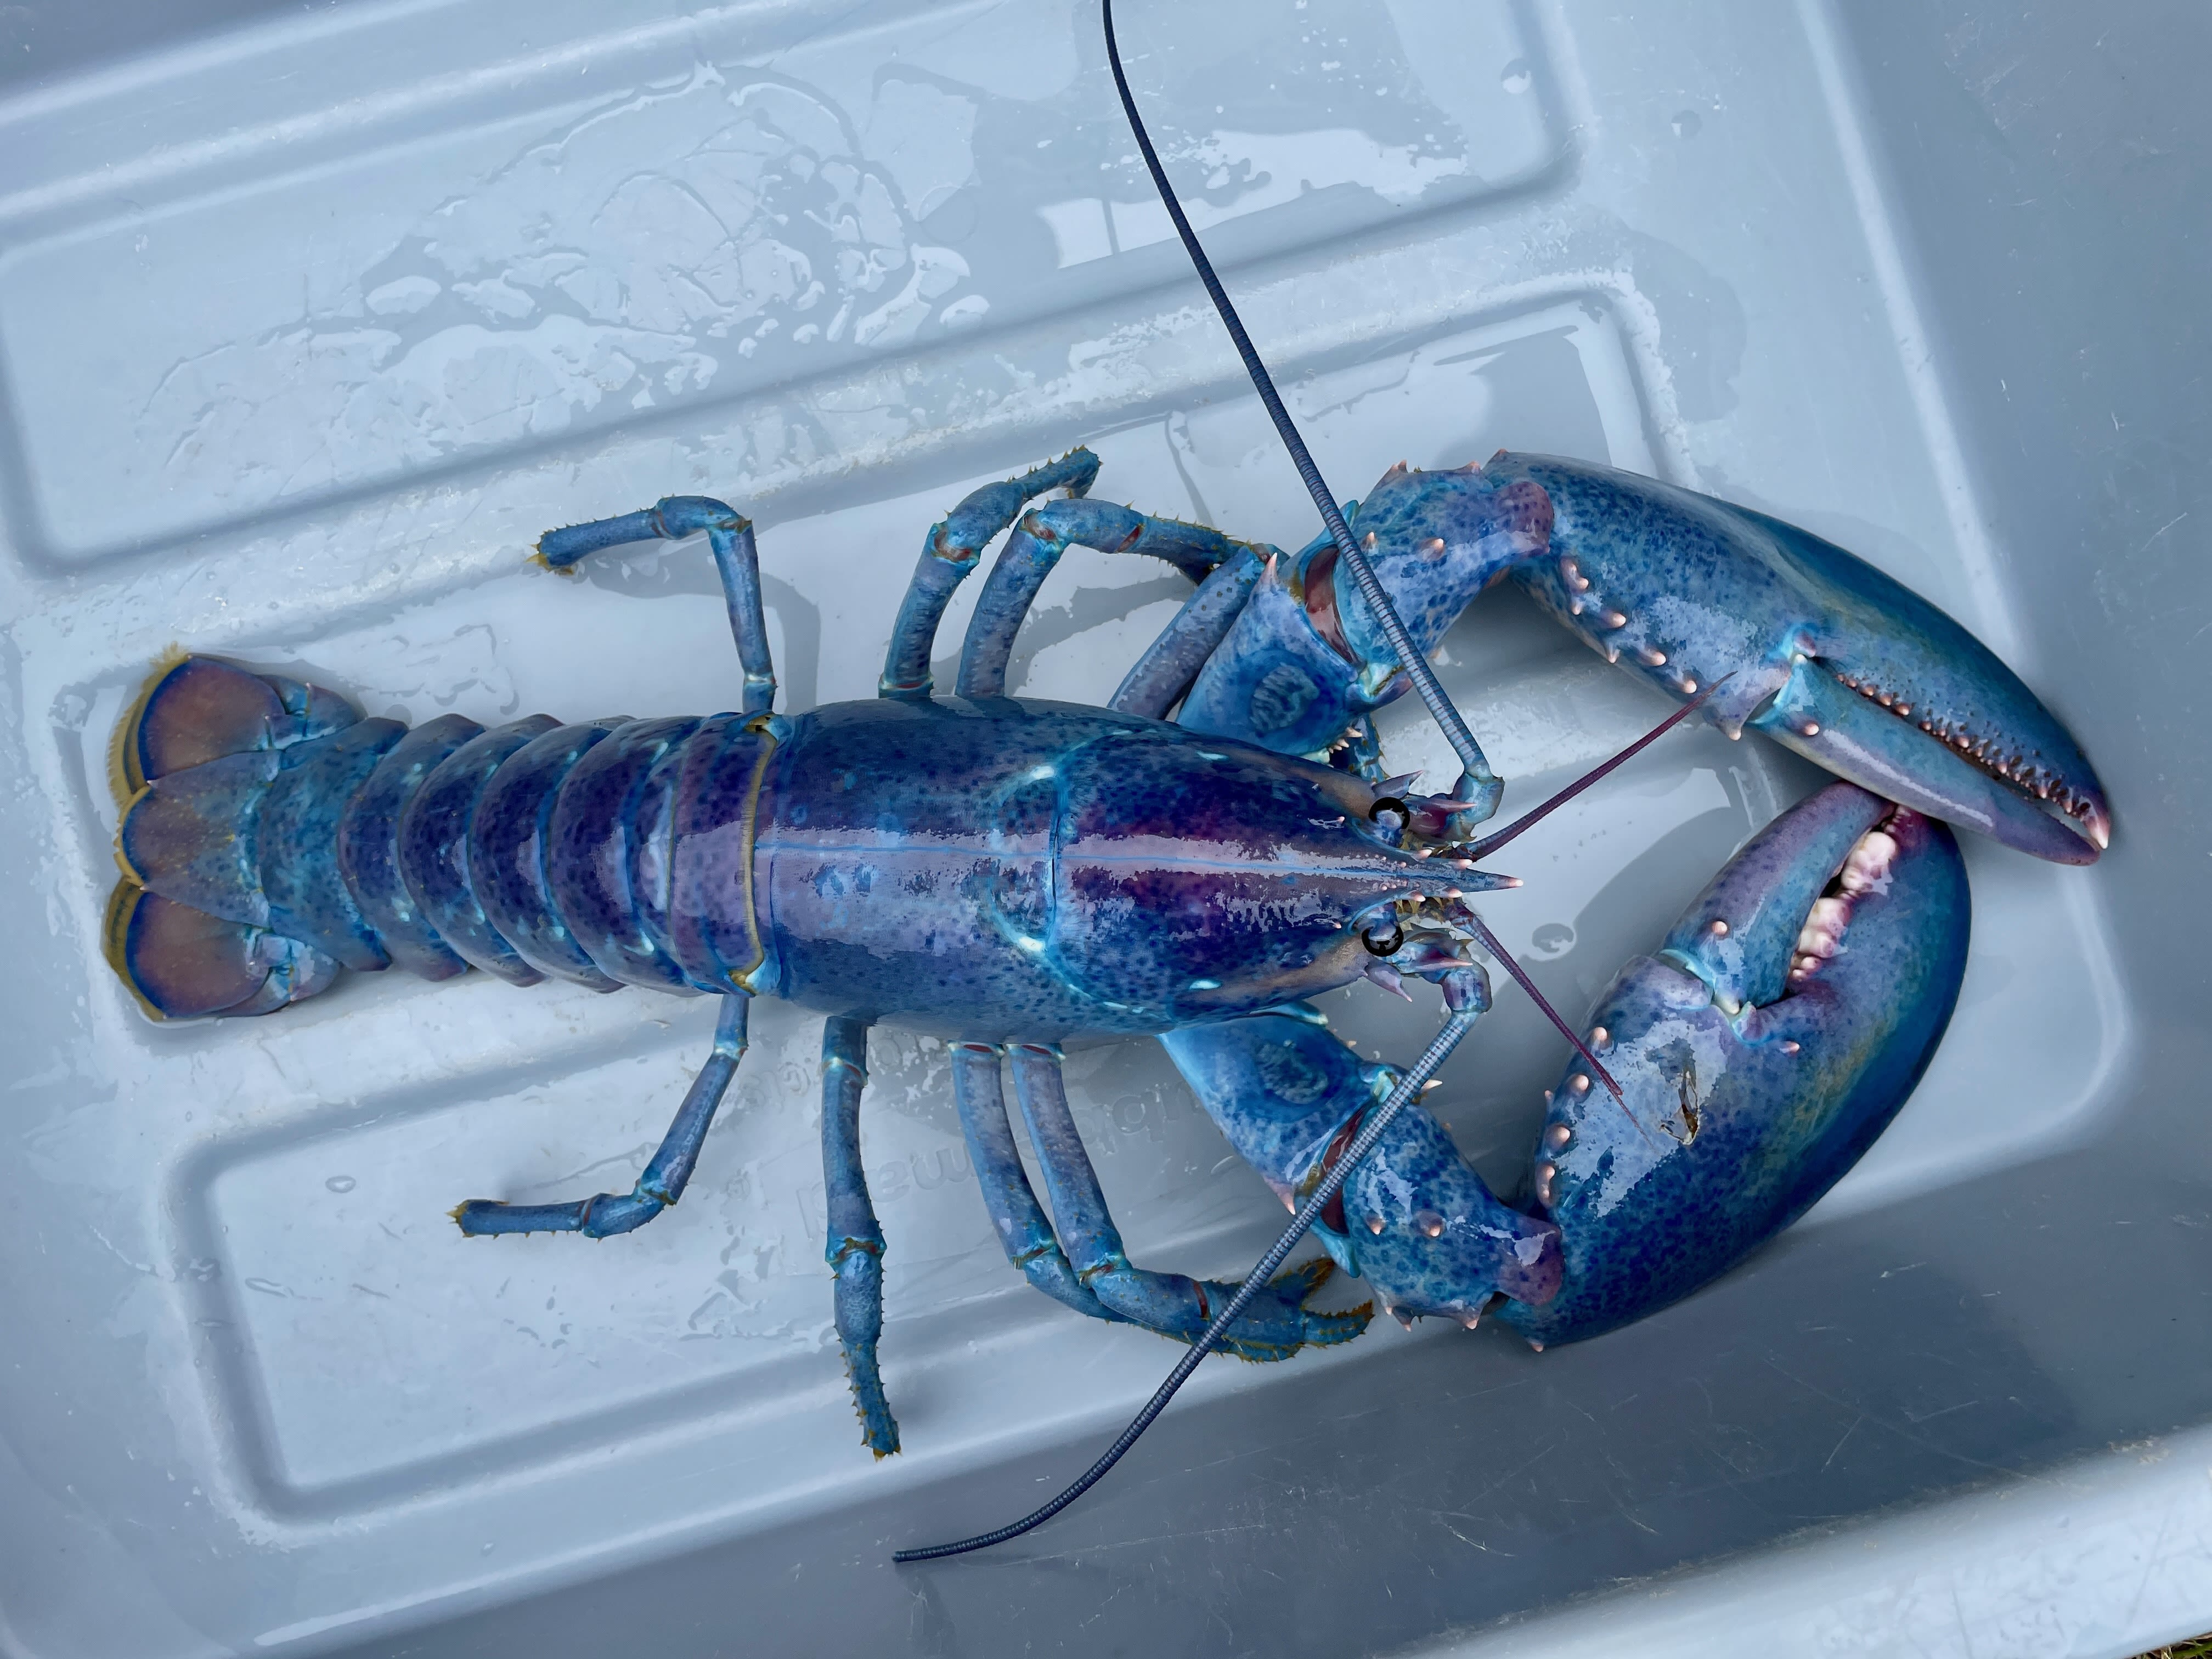 Rare 1-in-100-Million 'Cotton Candy' Lobster Found off the Coast of New Hampshire